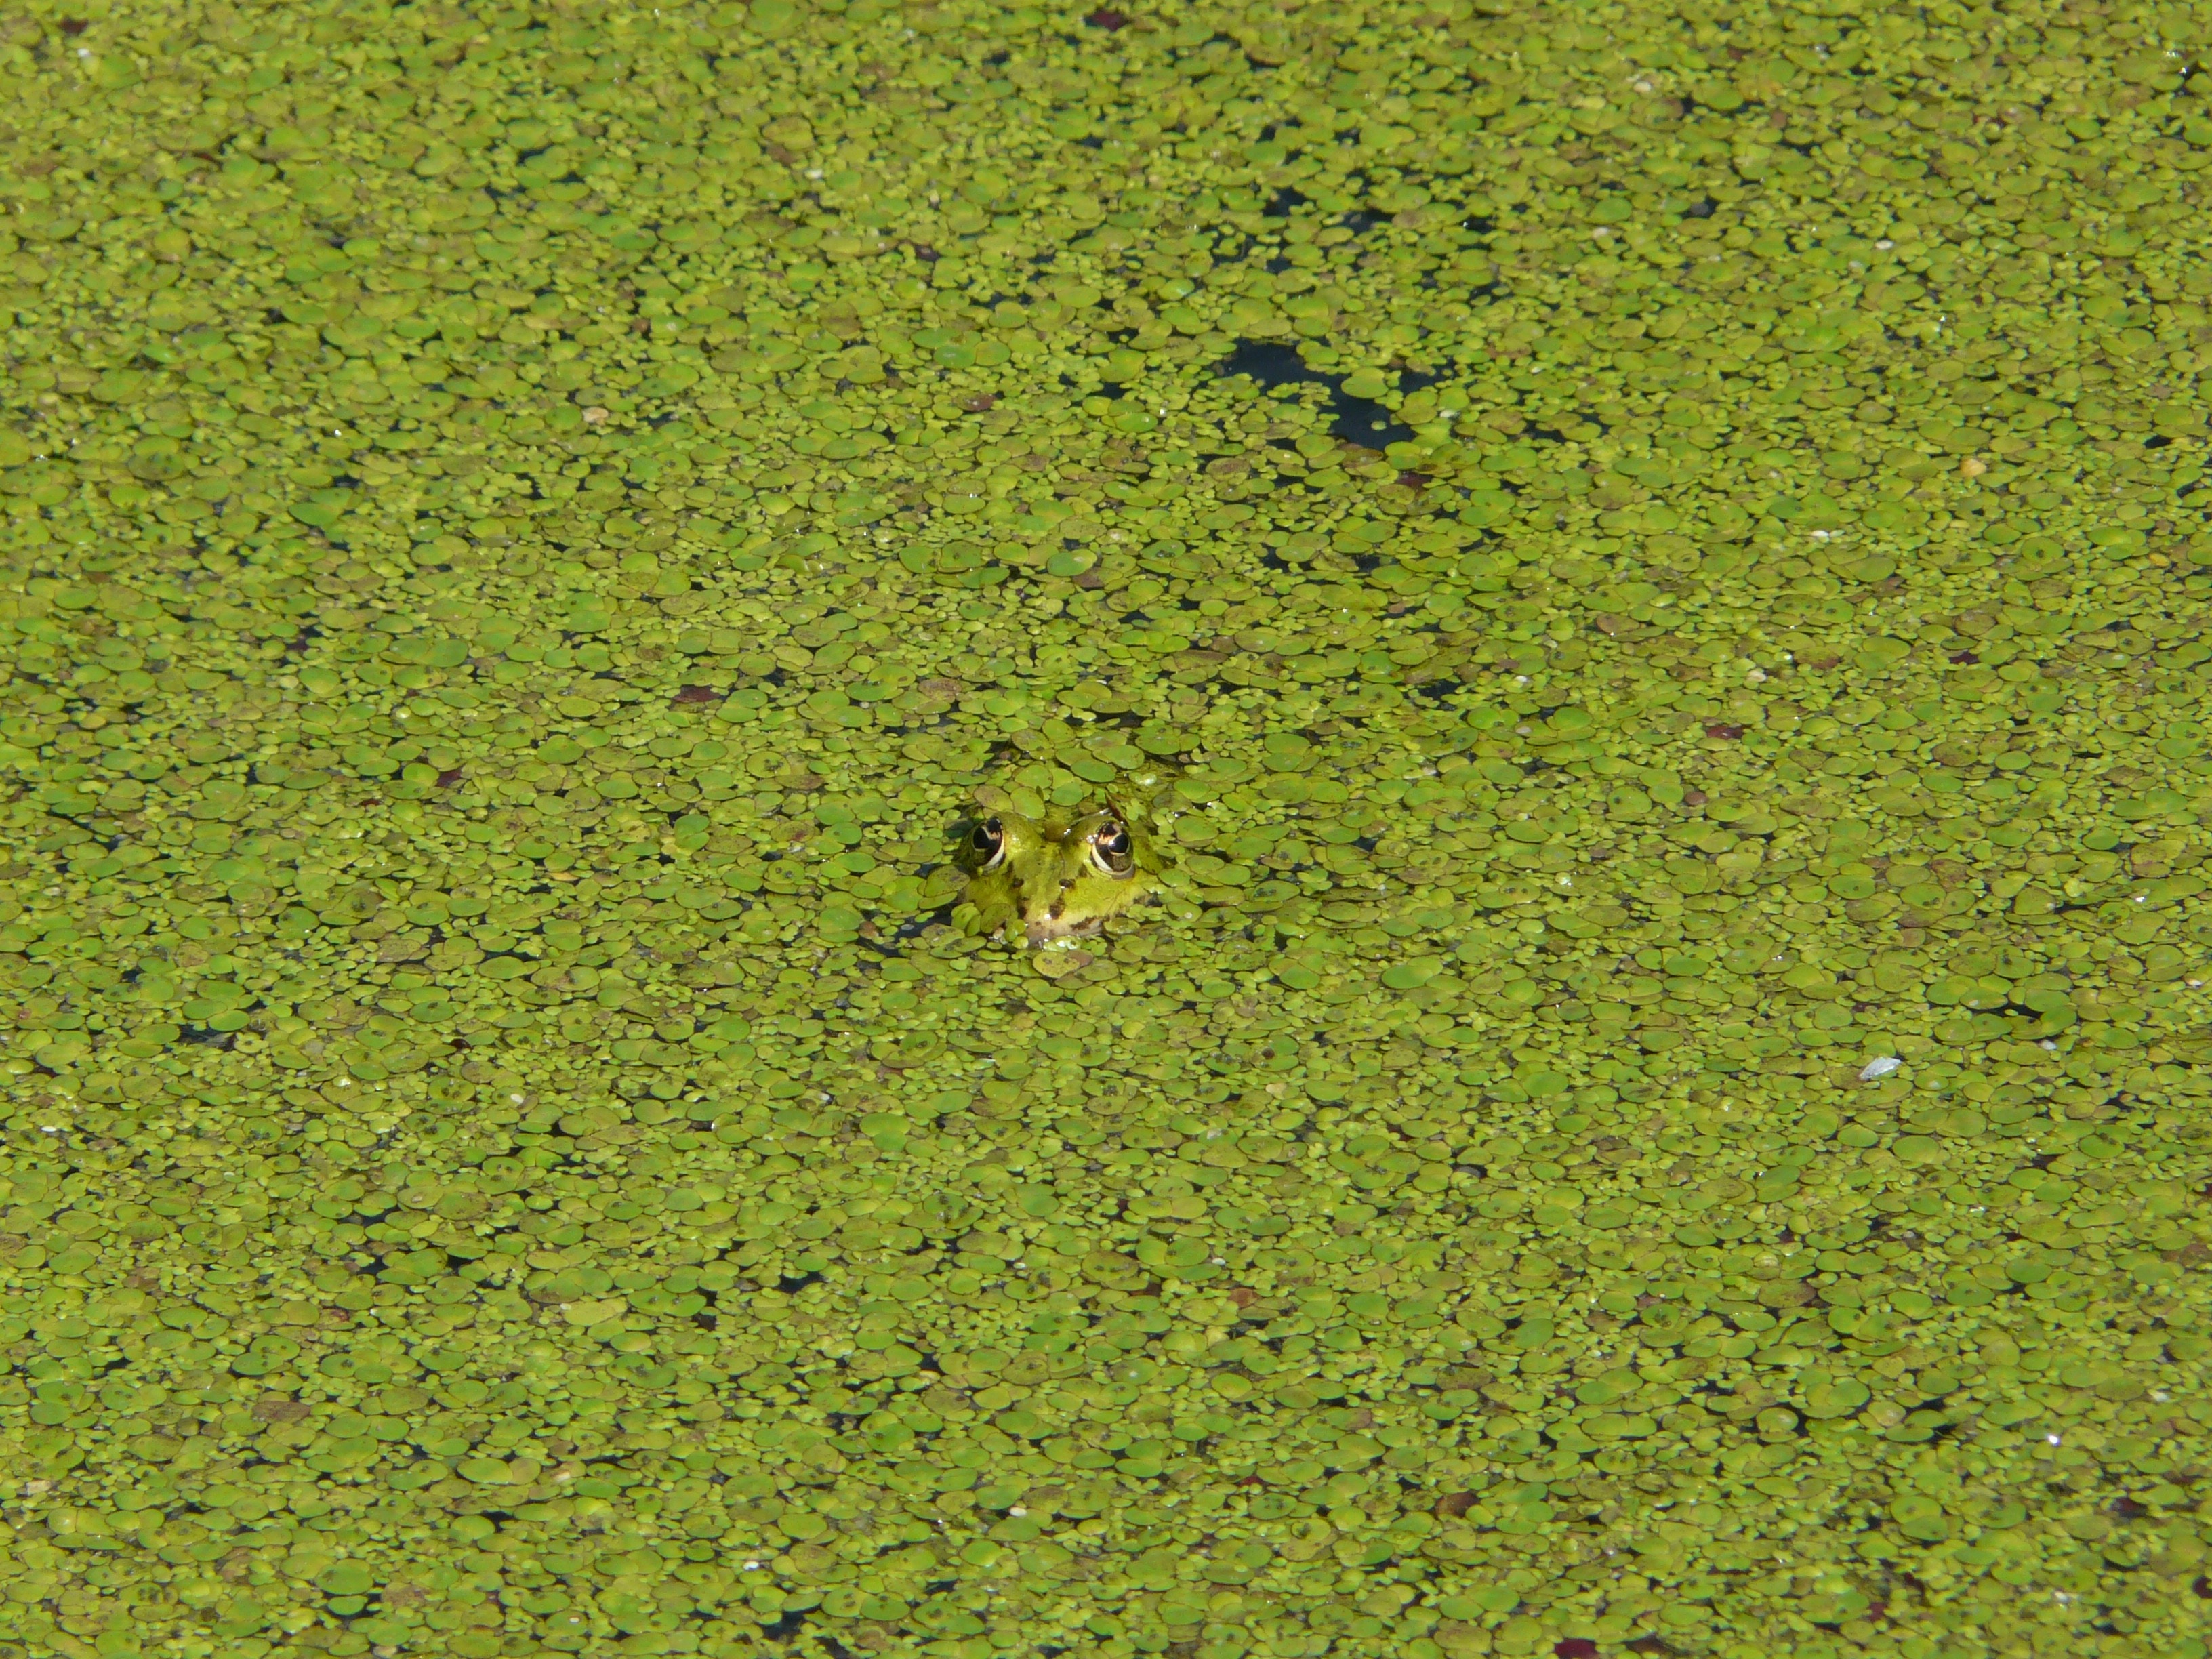 Amphibian, Pond, Water, Frog, Green, green color, grass